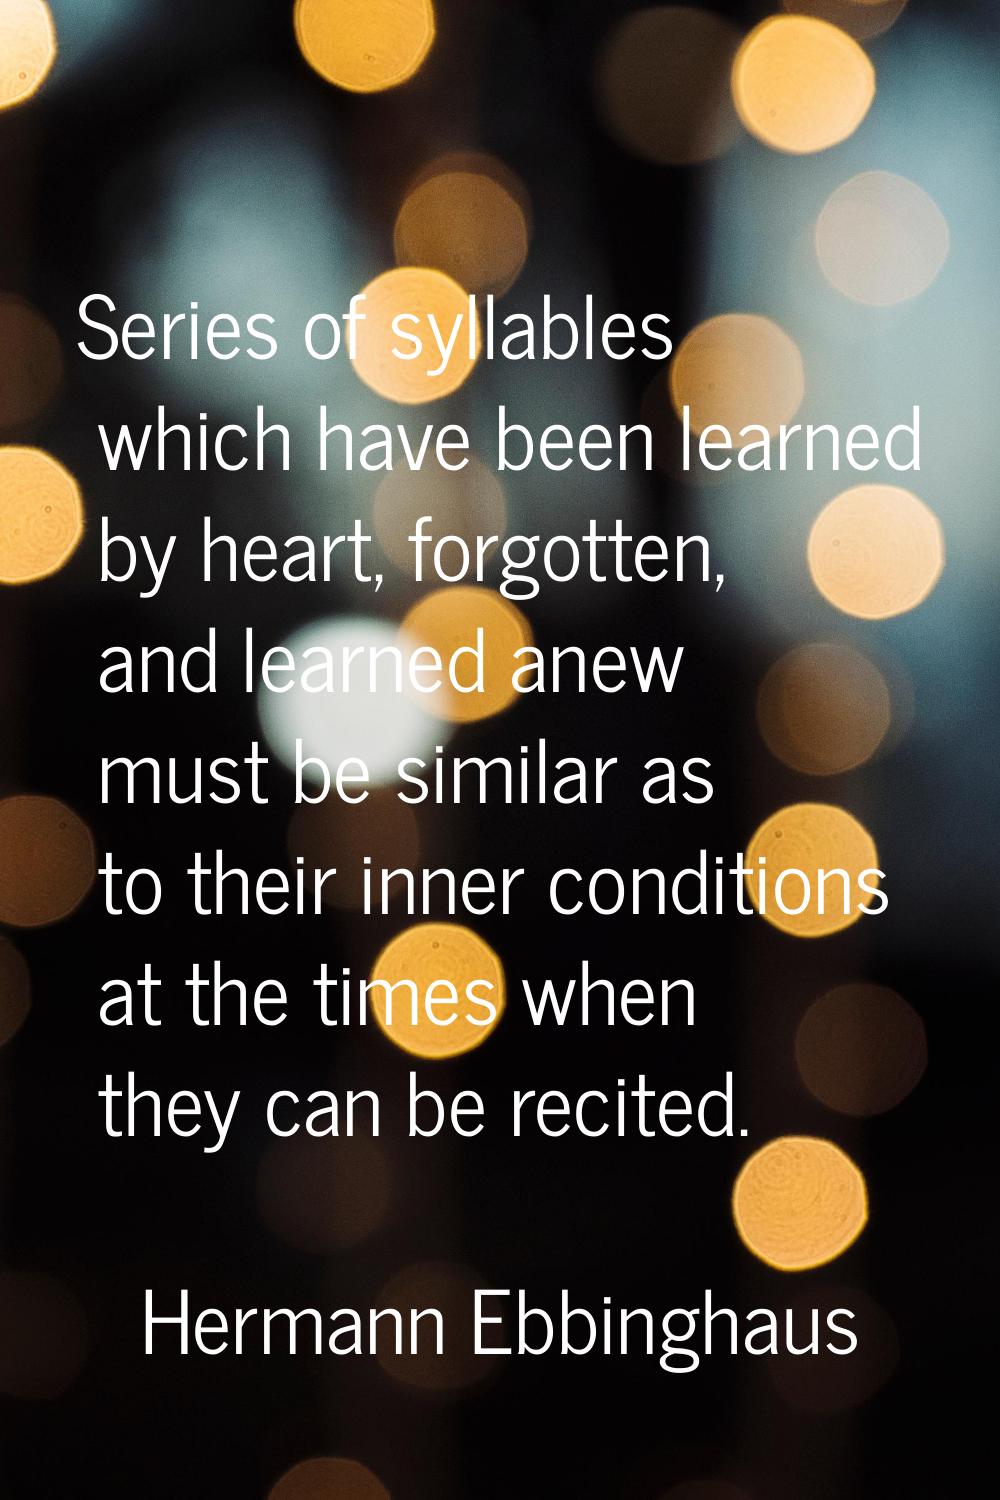 Series of syllables which have been learned by heart, forgotten, and learned anew must be similar a